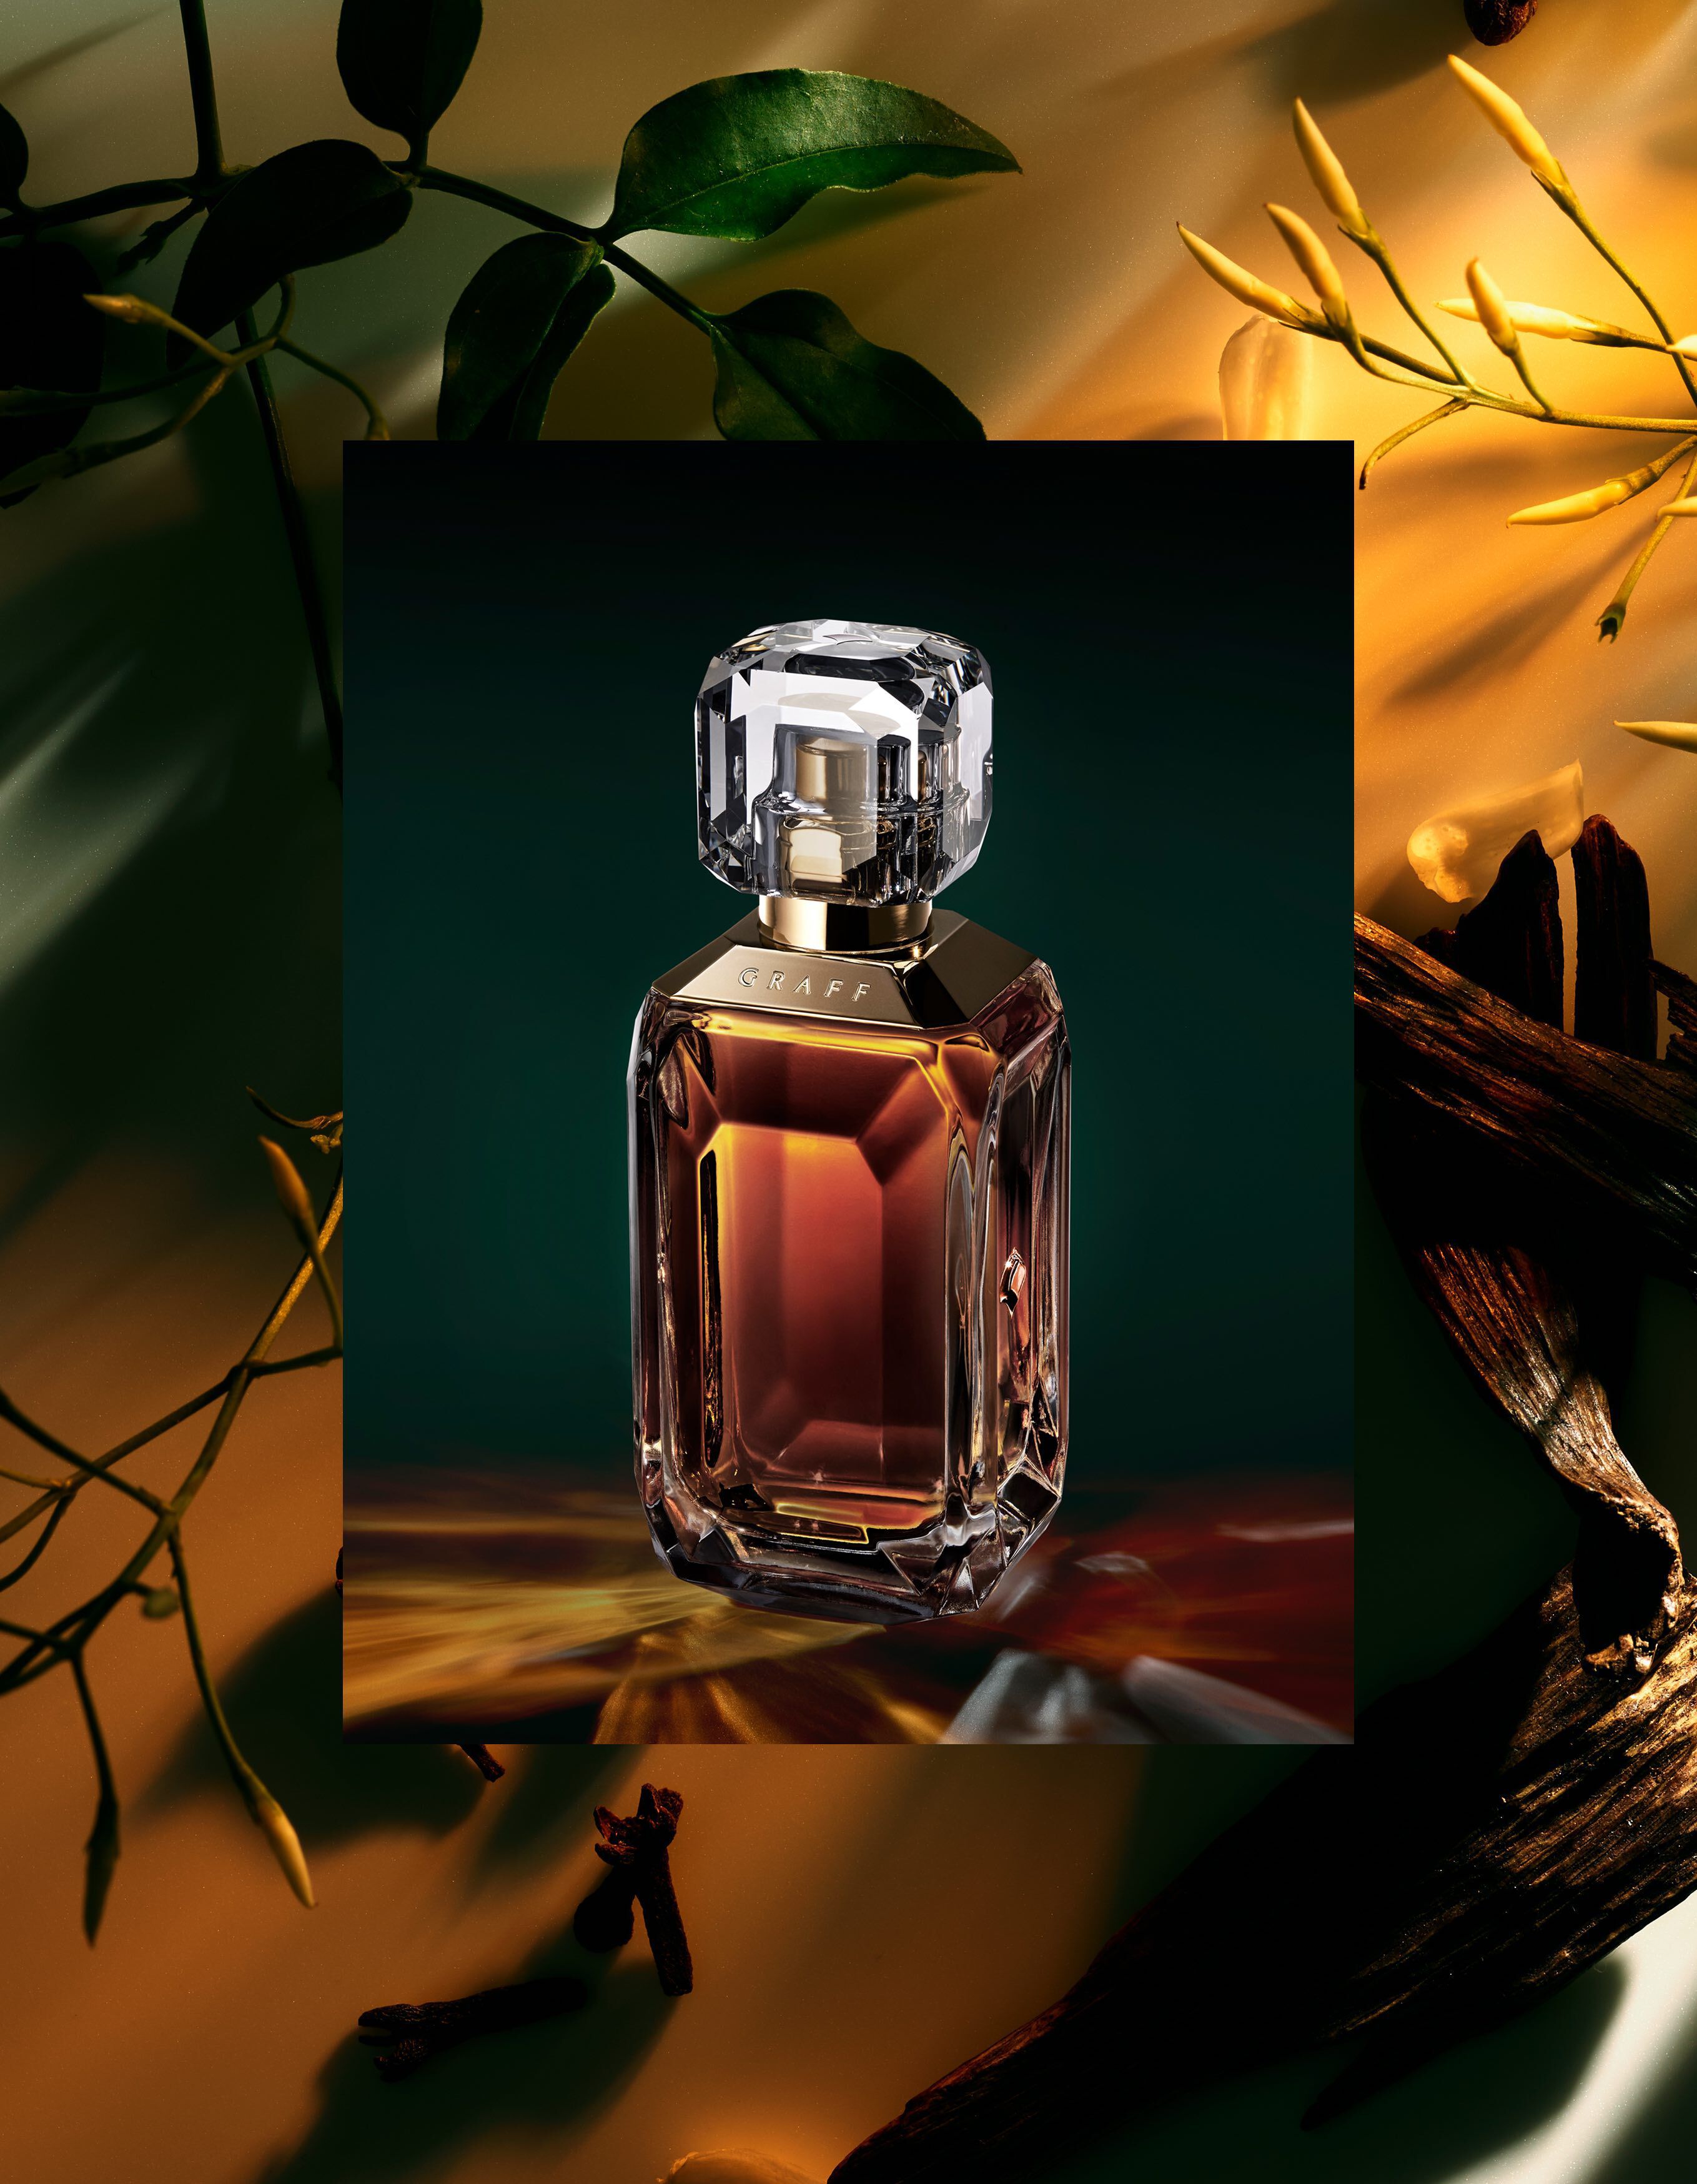 The Lesedi La Rona VI fragrance with ingredients by Graff